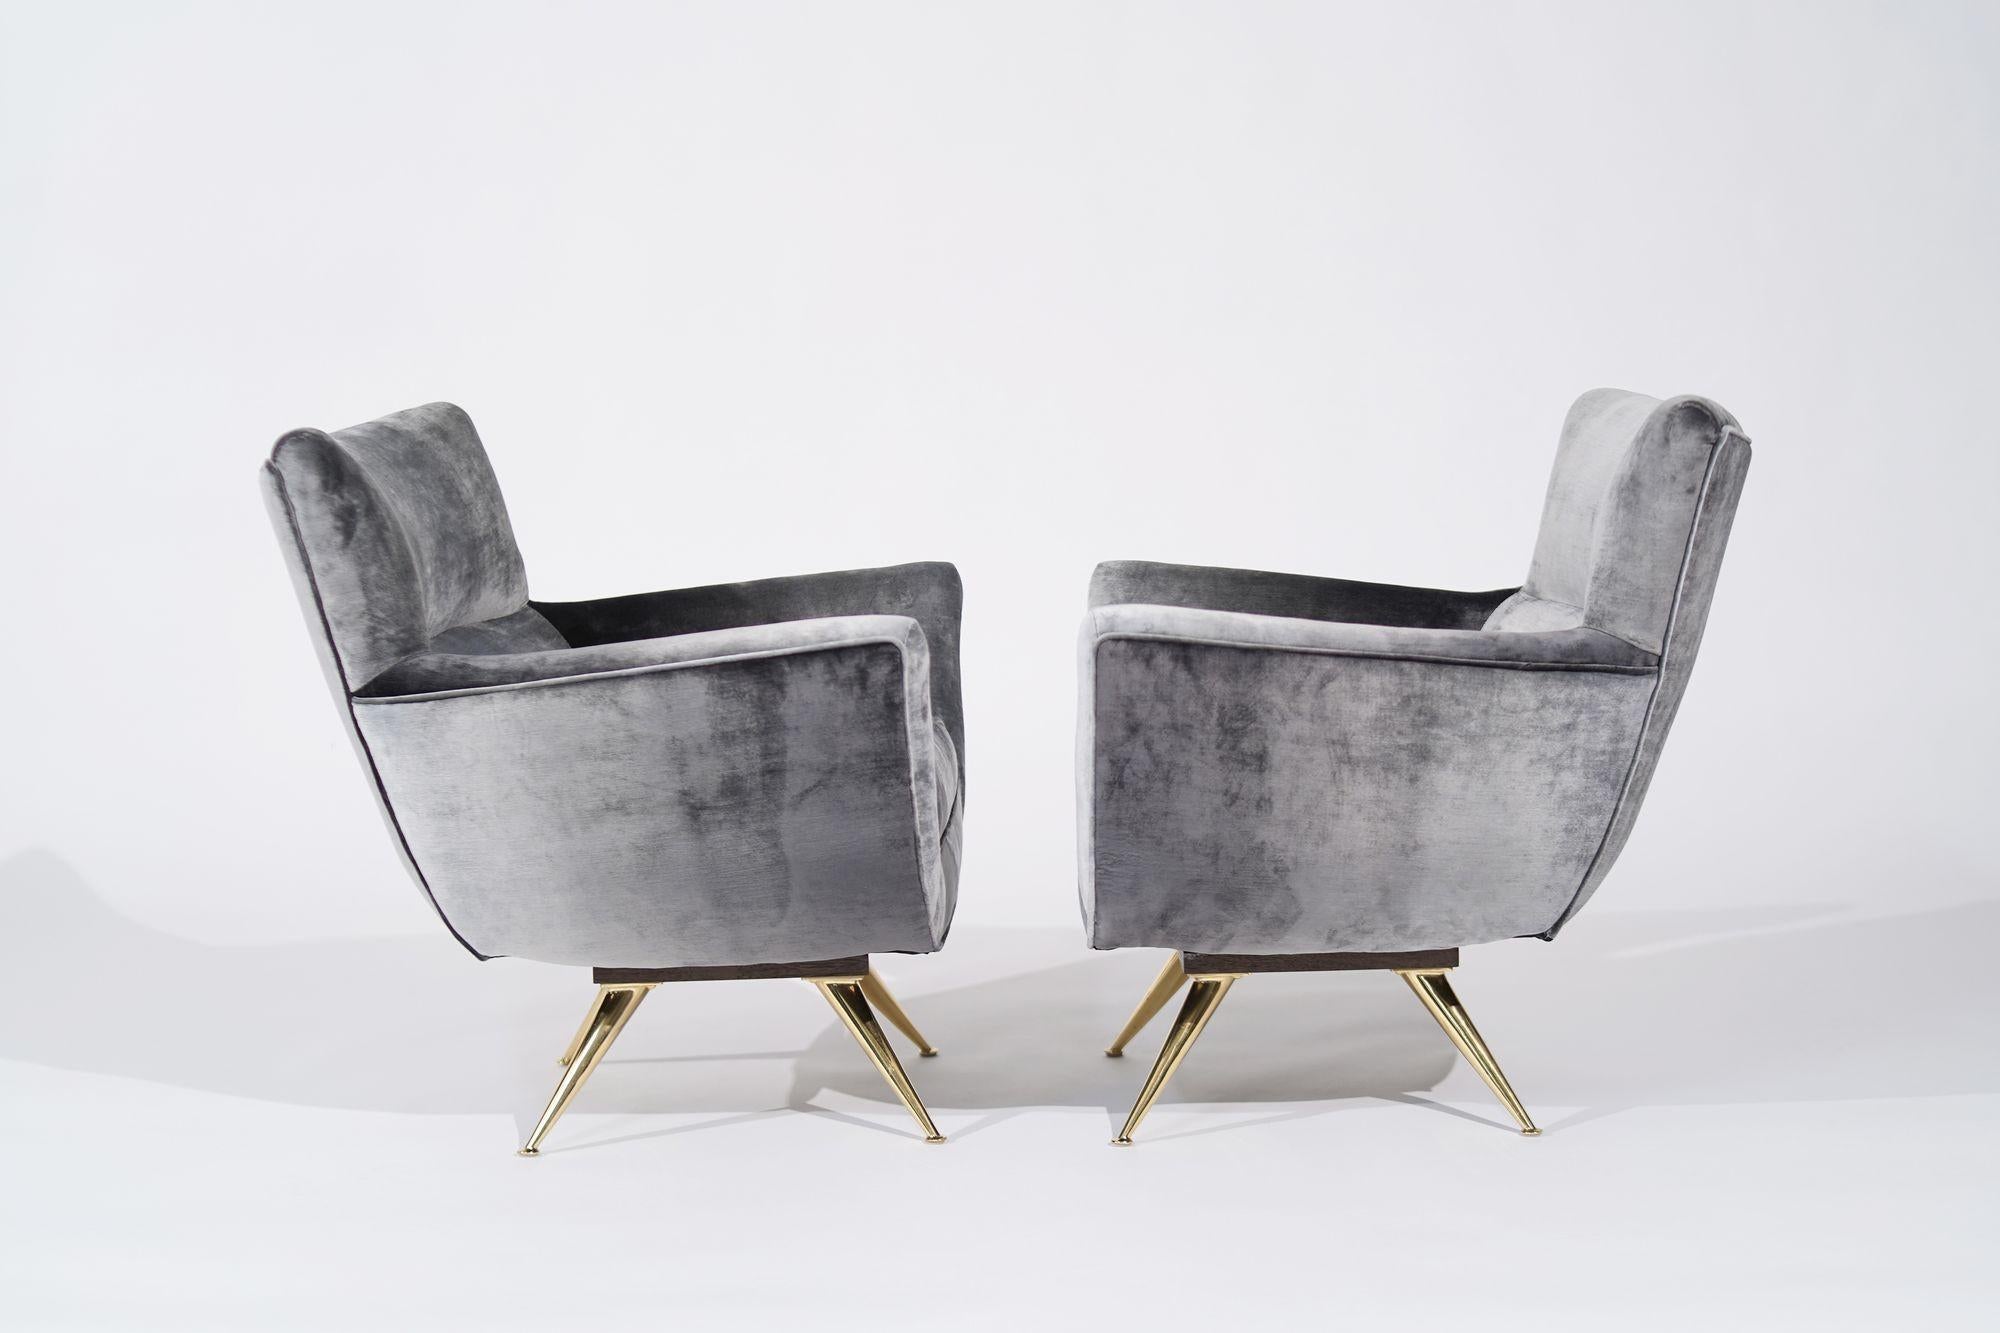 Henry Glass Swivel Chairs in Distressed Silver Velvet, C. 1950s In Excellent Condition For Sale In Westport, CT